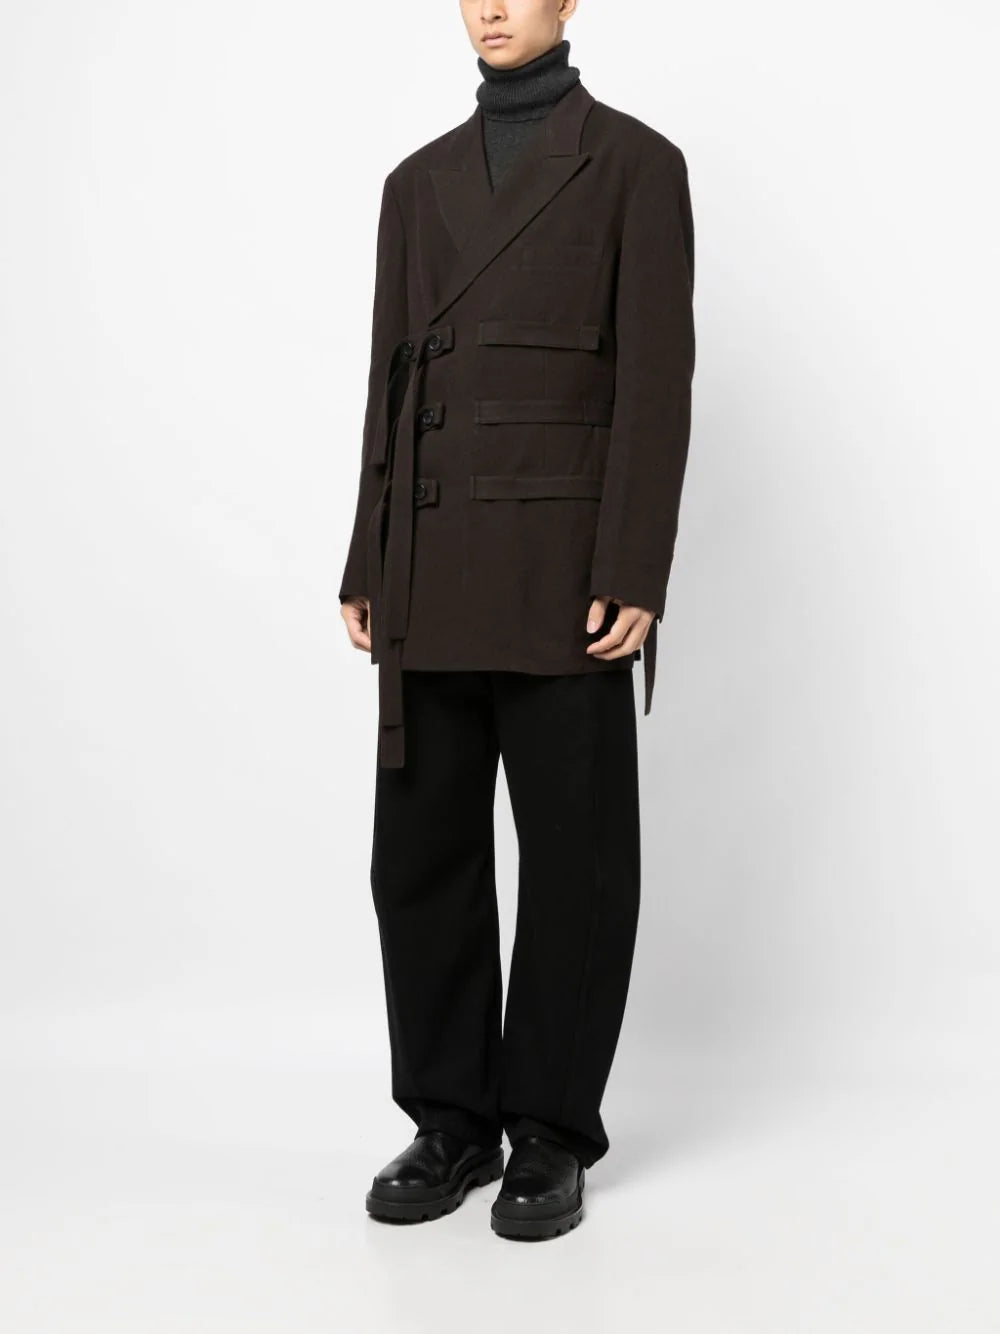 YOHJI YAMAMOTO POUR HOMME Multi-Belted Double Breasted Jacket